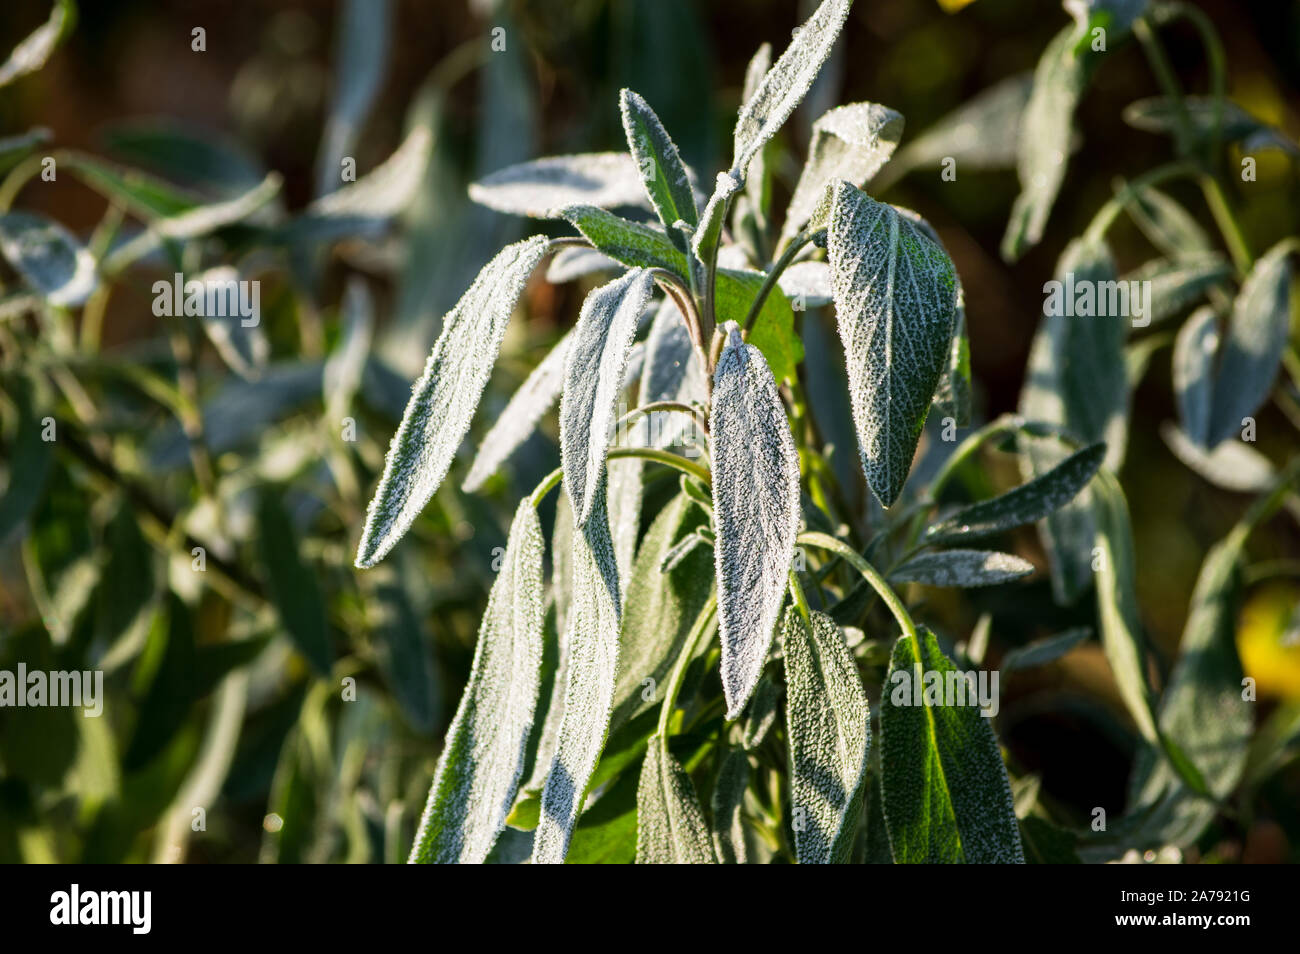 hoar frost on green sage leaves in October frost and warm morning light Stock Photo